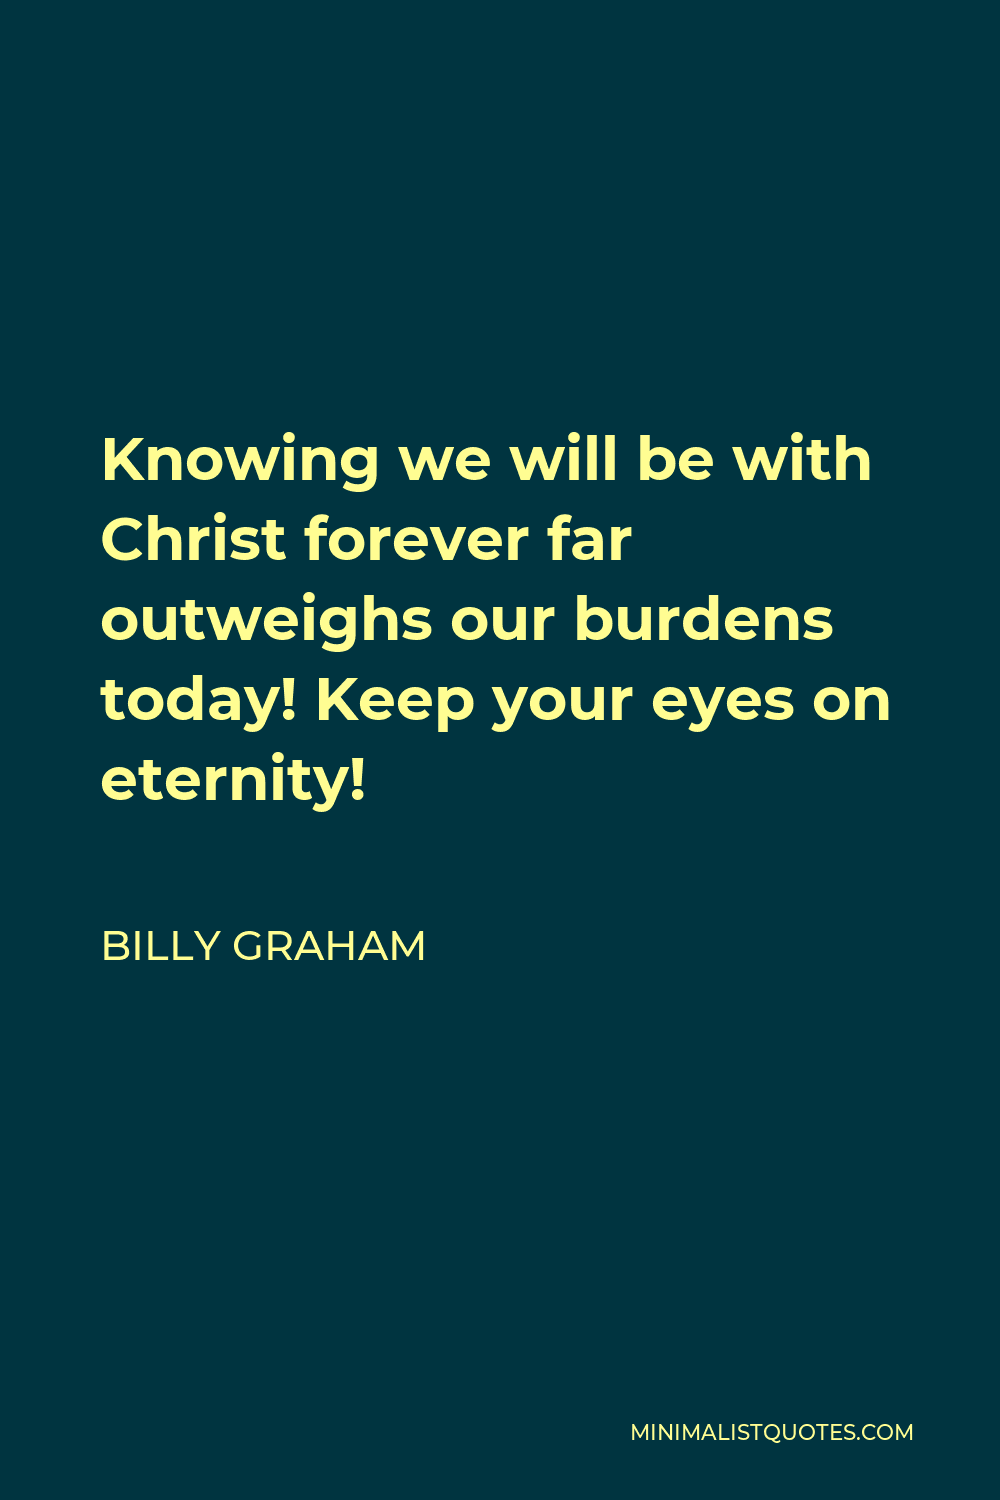 Billy Graham Quote - Knowing we will be with Christ forever far outweighs our burdens today! Keep your eyes on eternity!